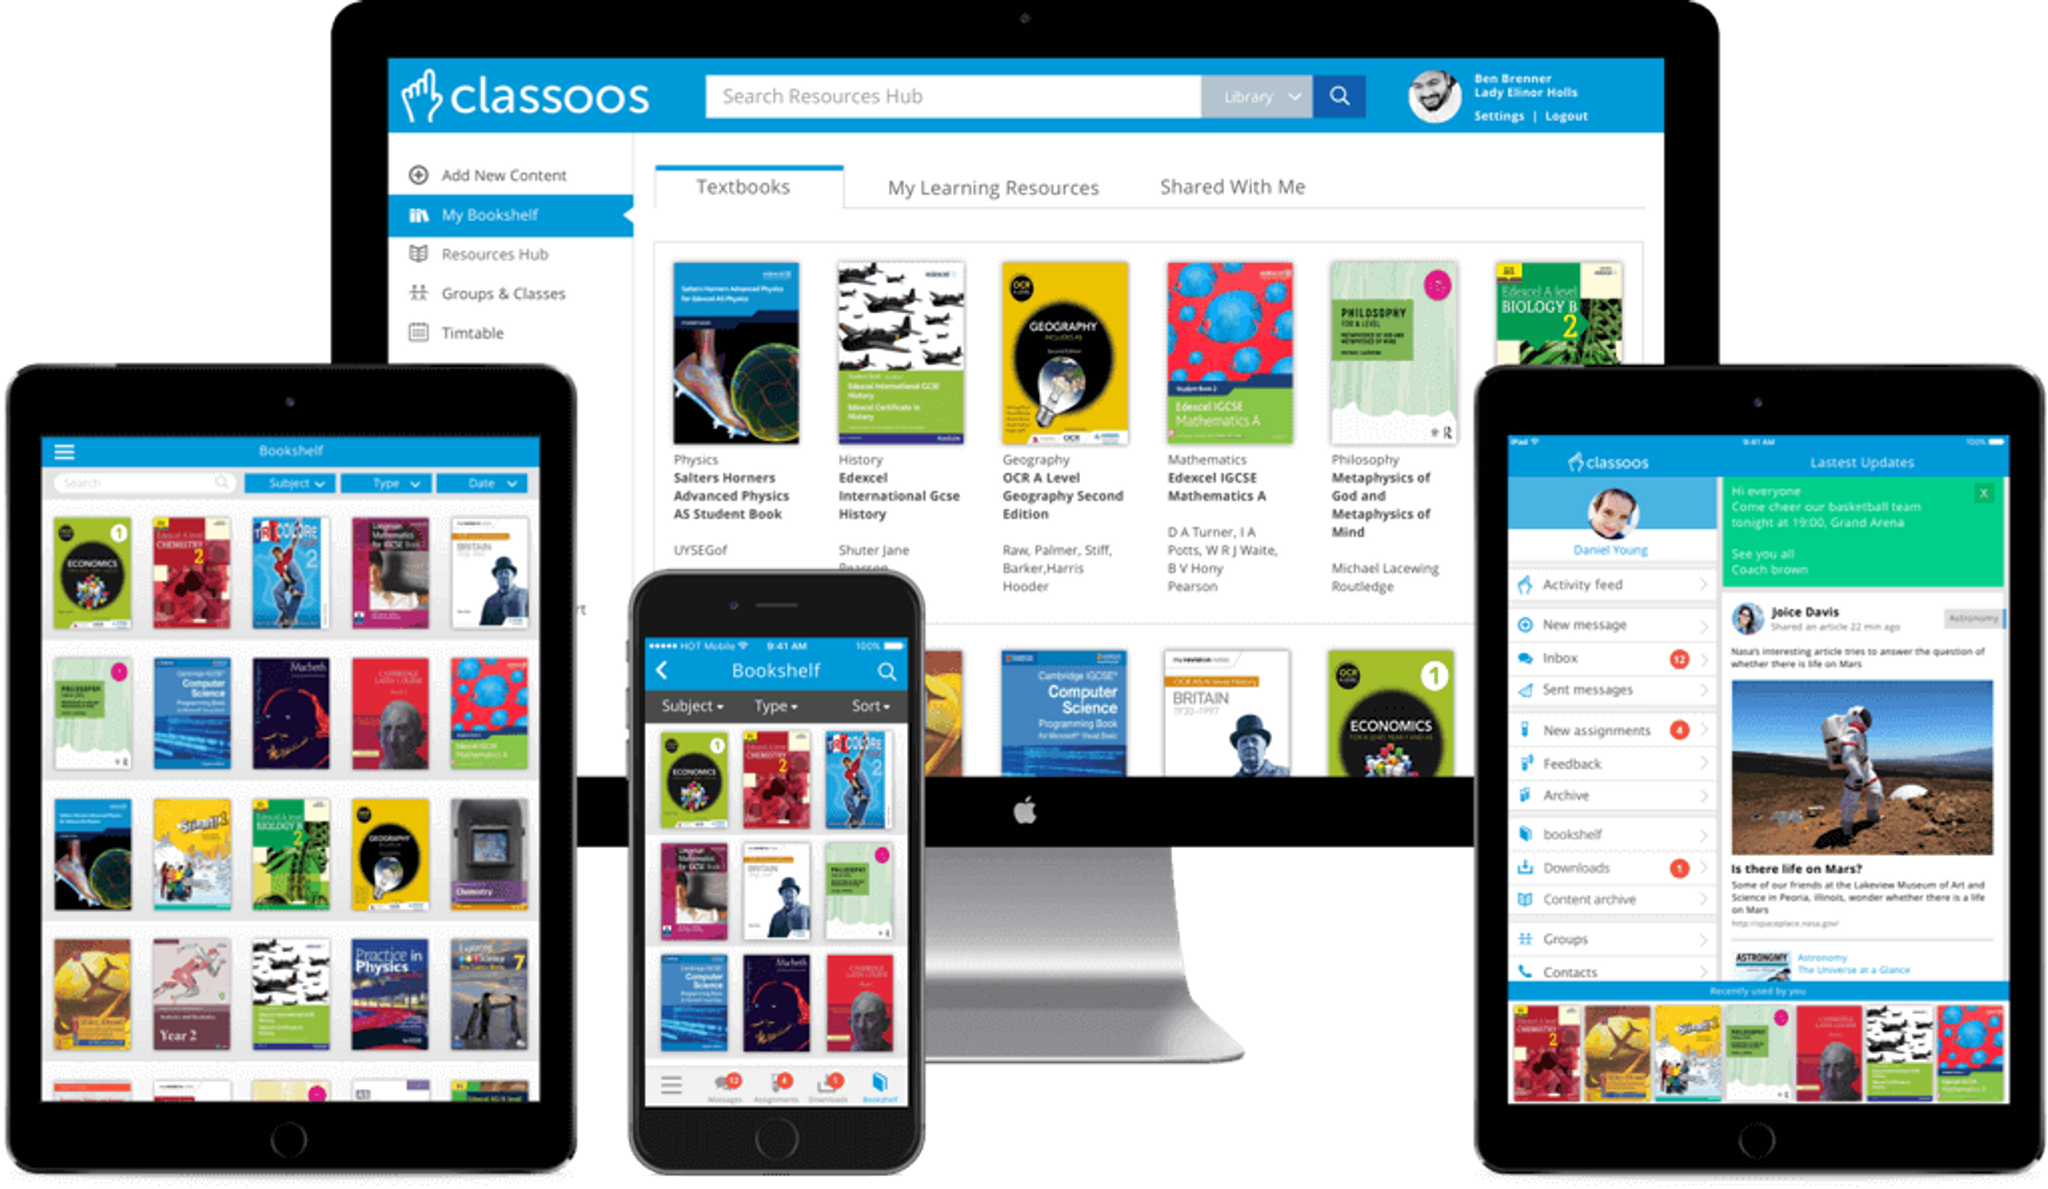 Kalsefer’s all-in-one learning platform and Digital Textbook Service, classoos™, has made K-12 textbooks totally digital and on-demand